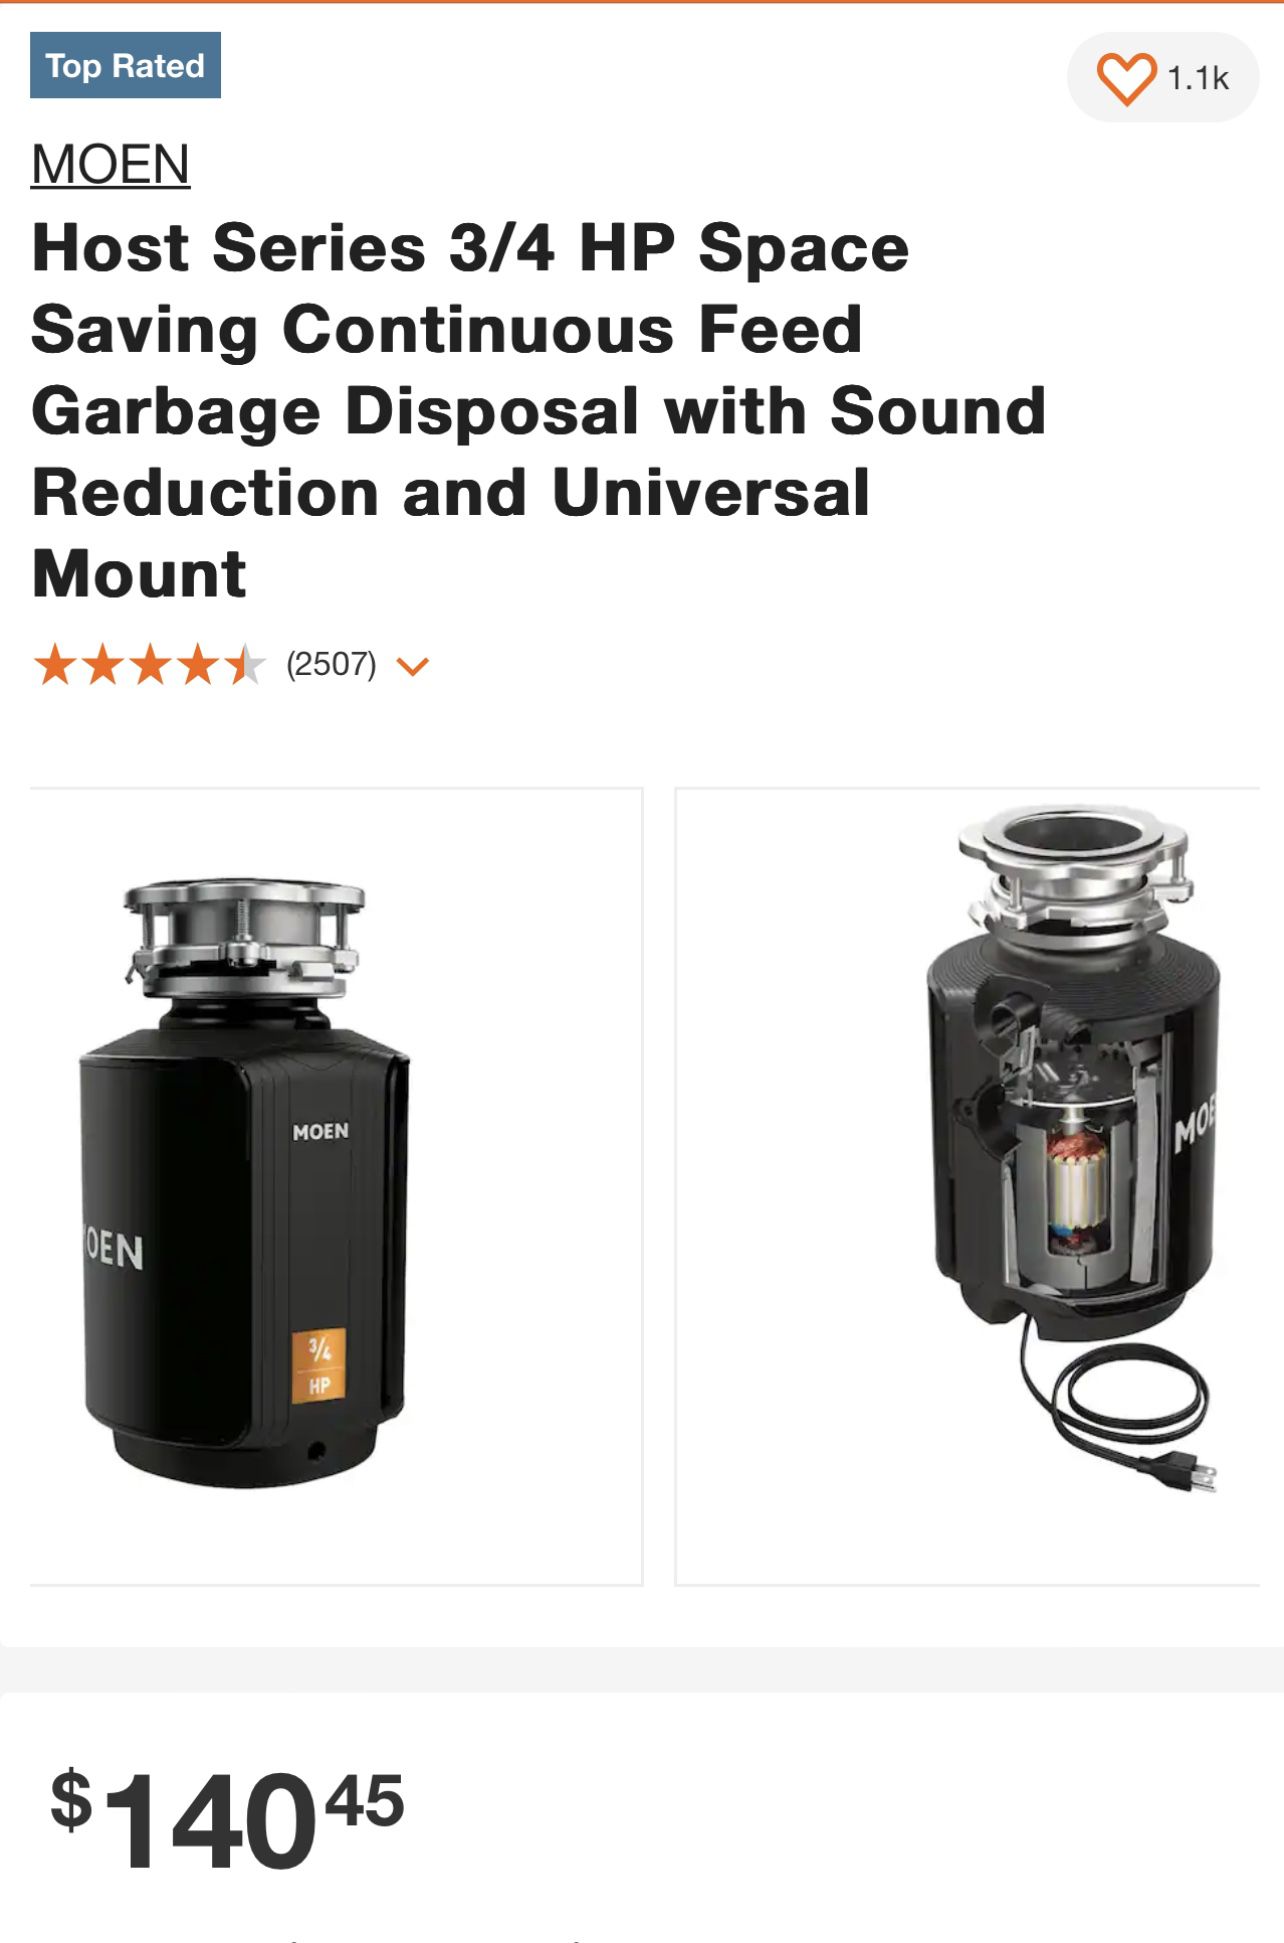 MOEN Host Series 3/4 HP Space Saving Continuous Feed Garbage Disposal with Sound  Reduction and Universal Mount for Sale in Tustin, CA OfferUp